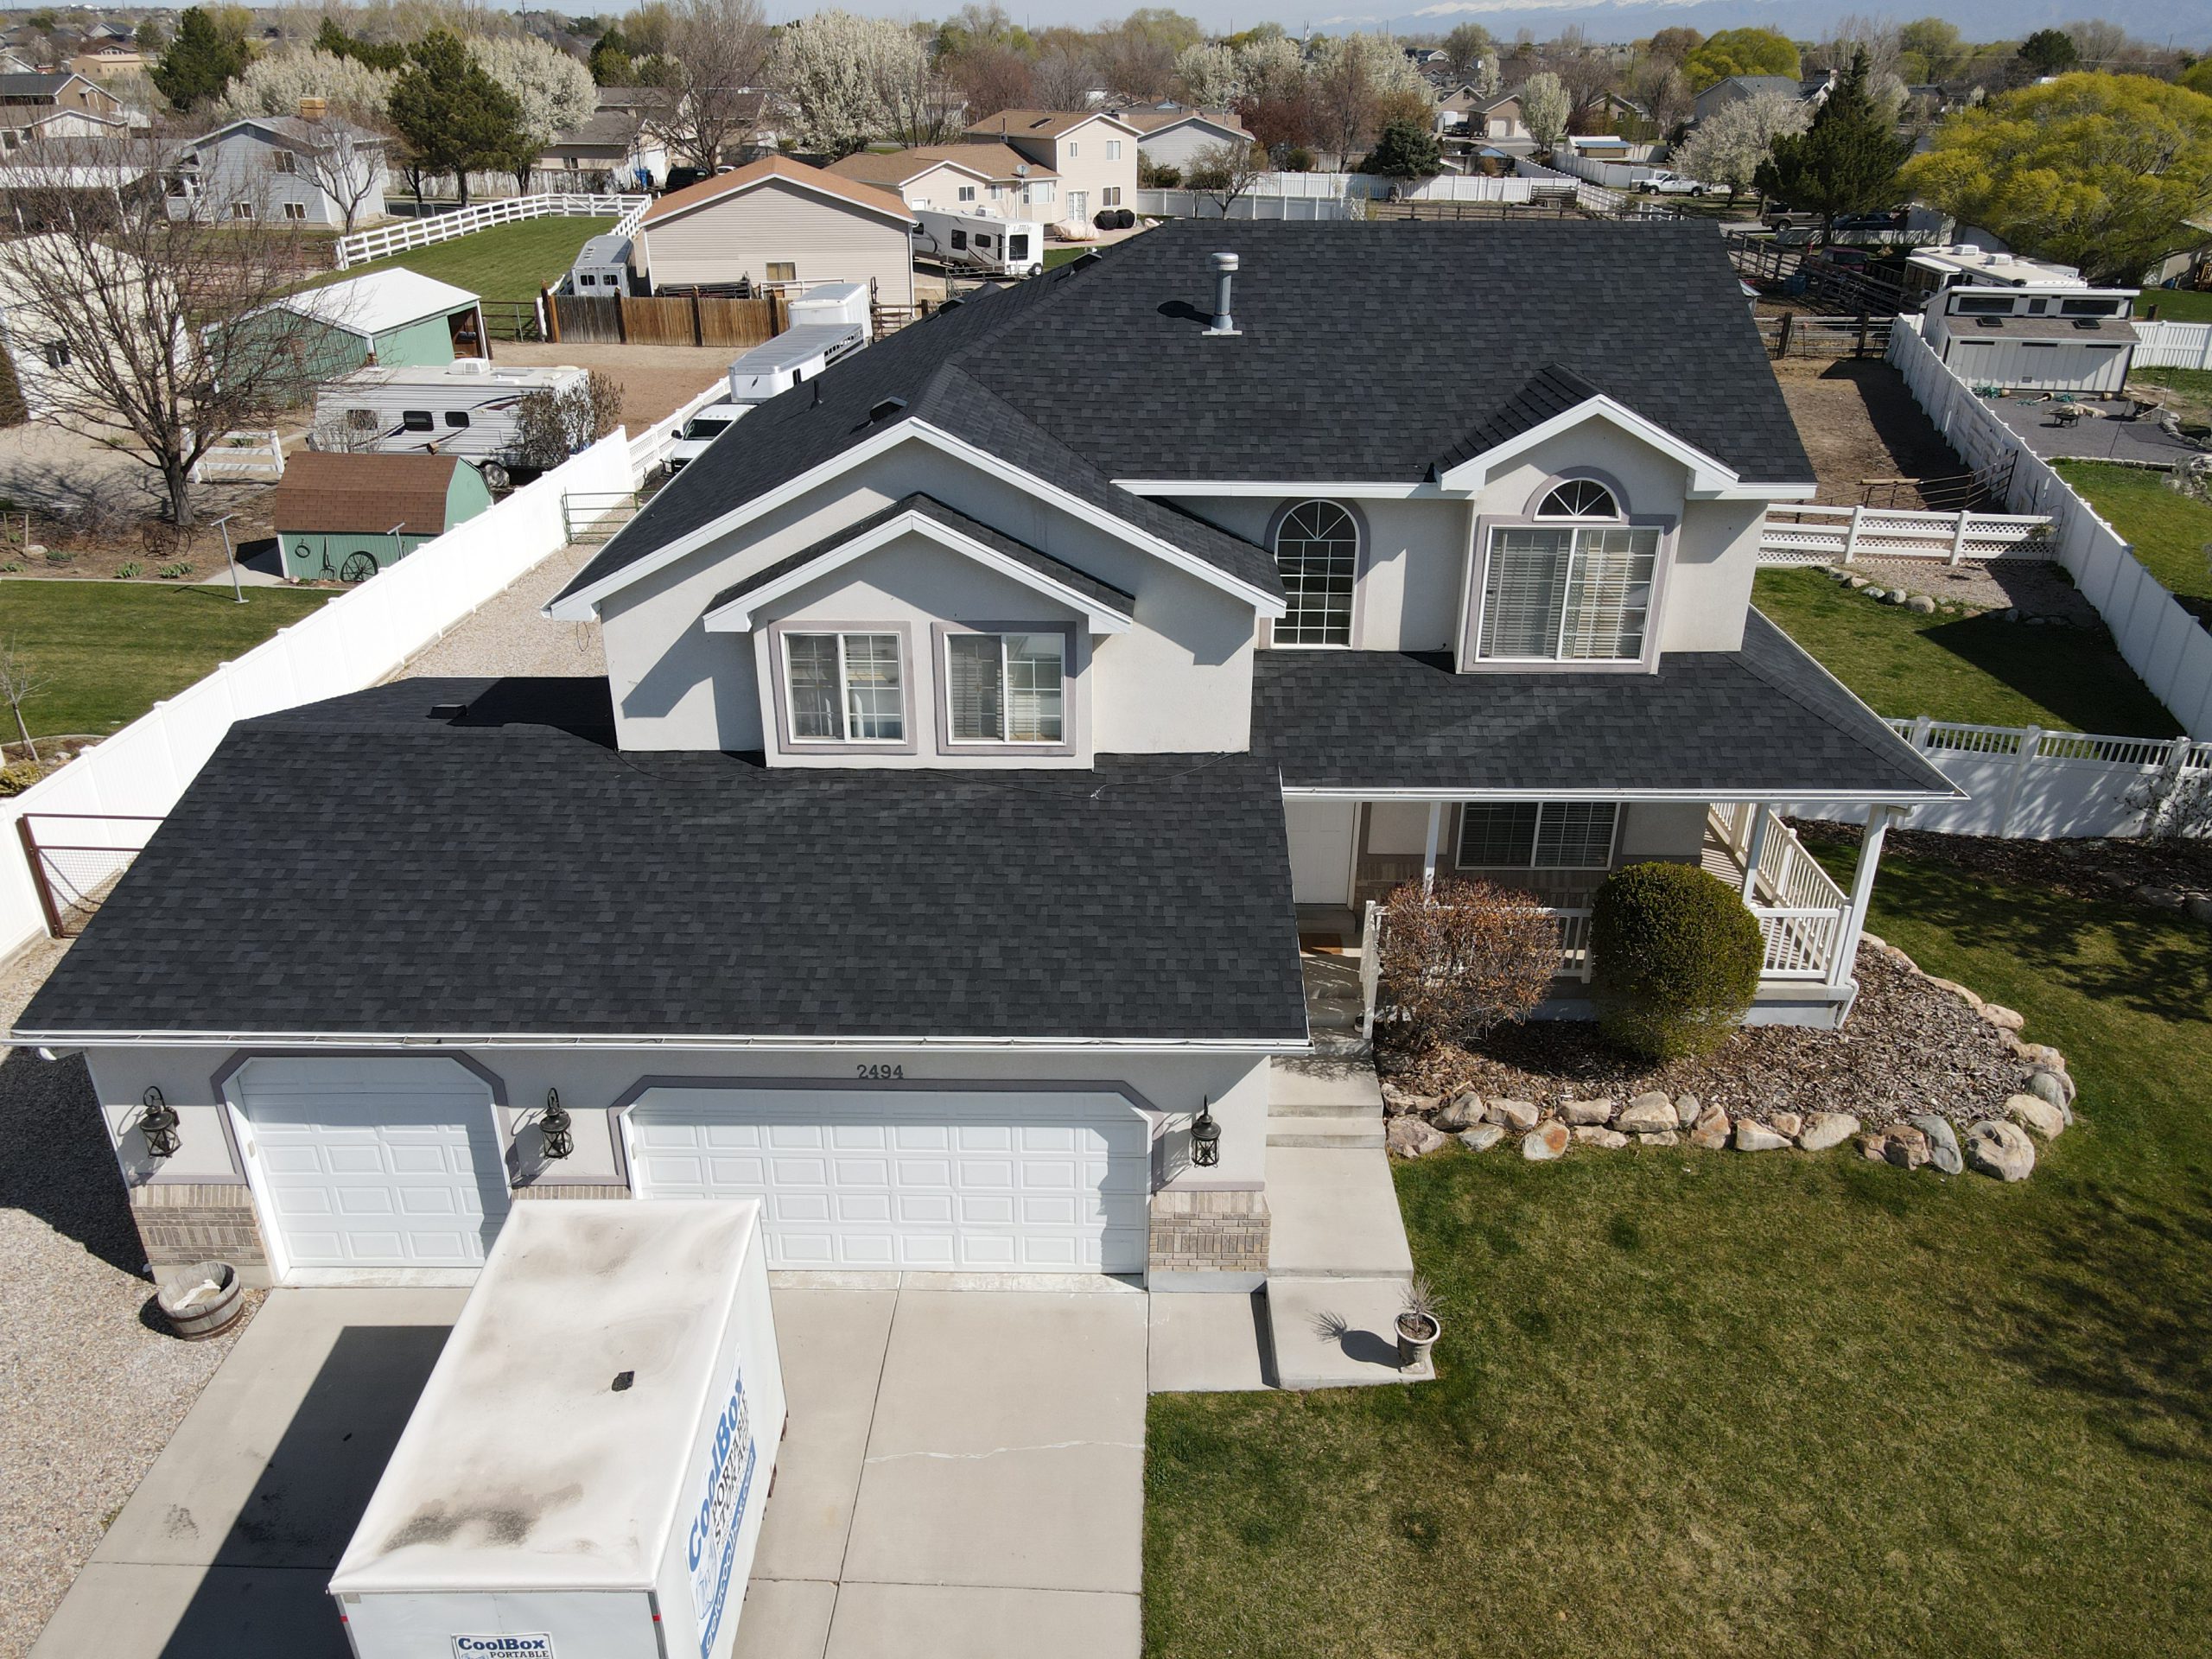 Lehi’s Premier Roofing Company Offering Impeccable Workmanship